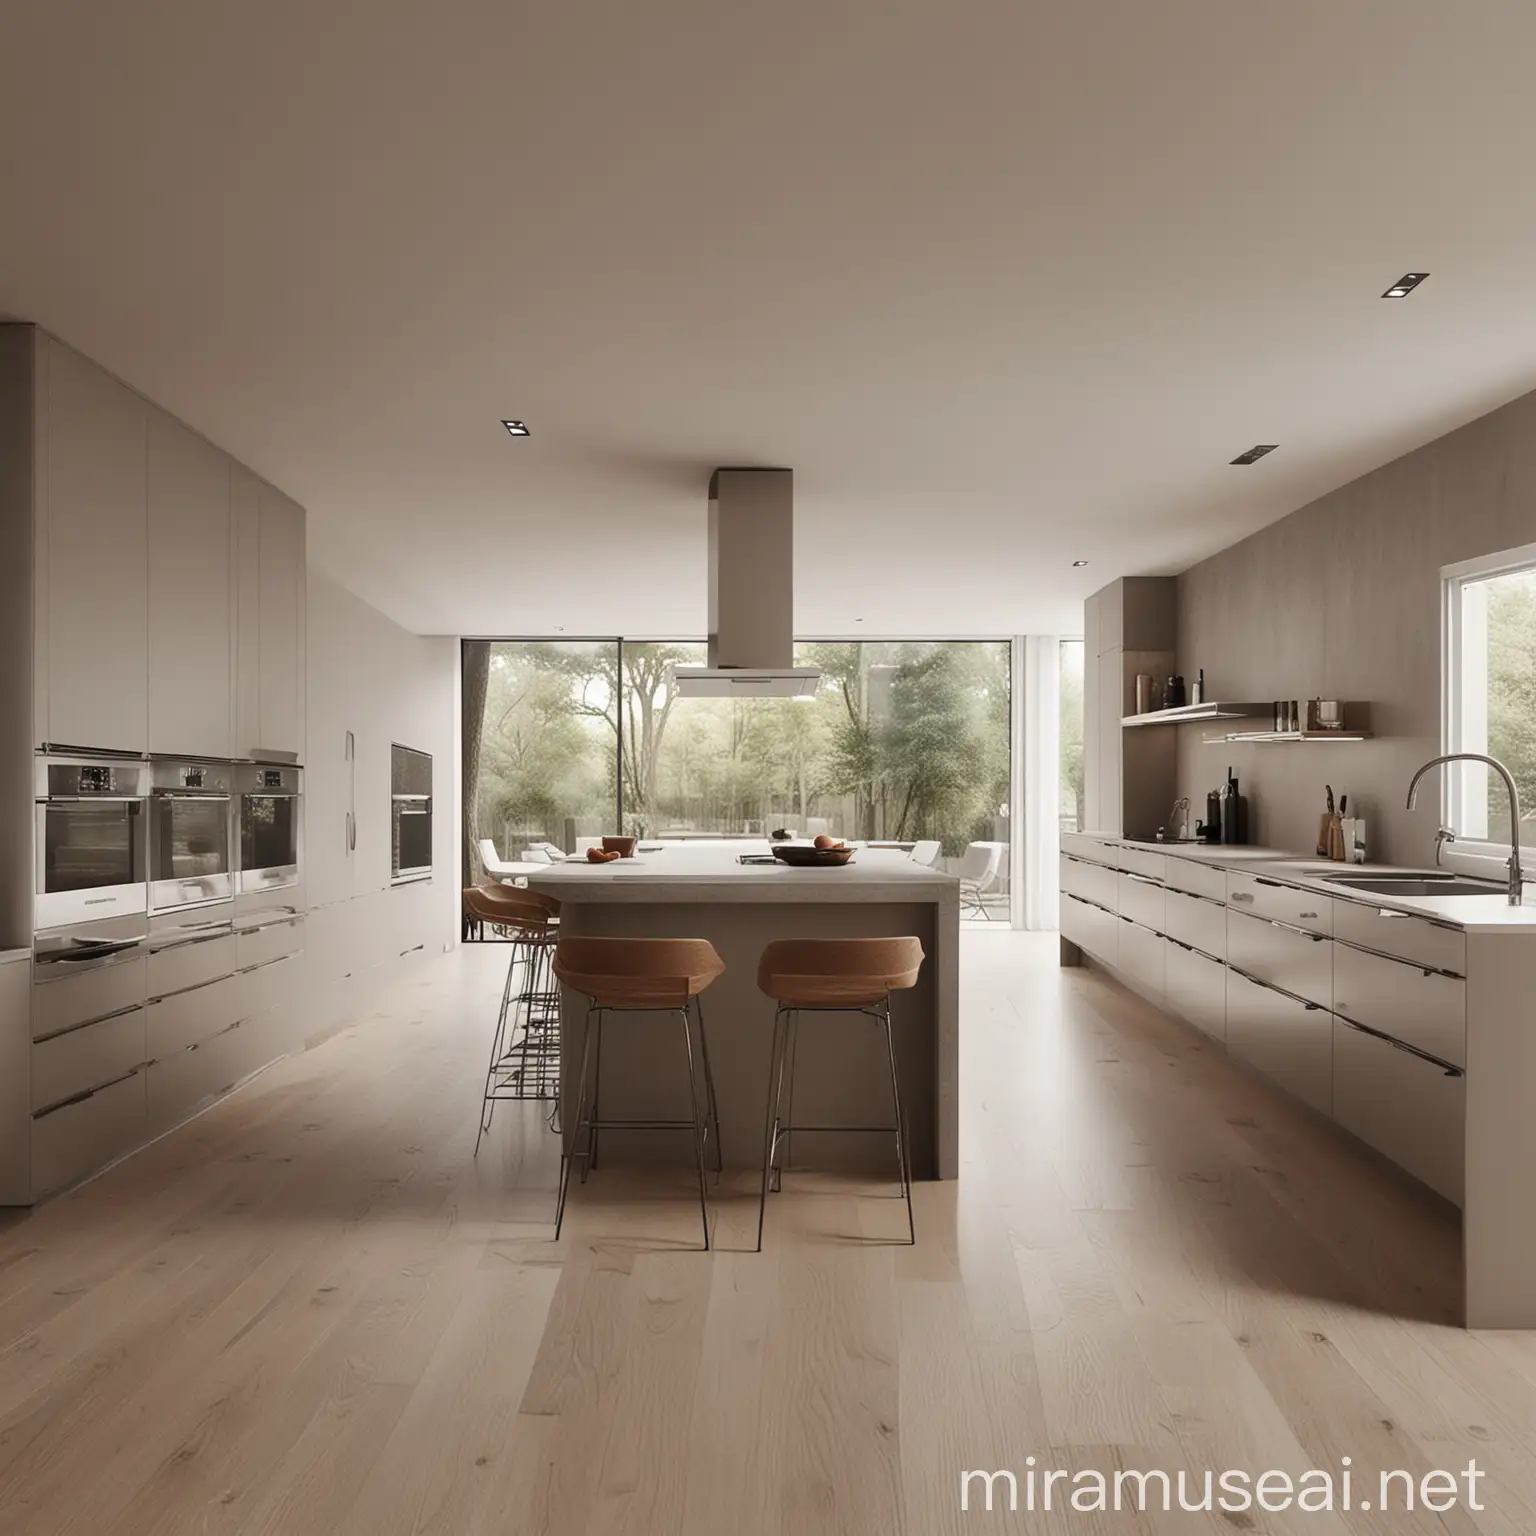 A realistic minimalist interior design image of a large kitchen for Tupac